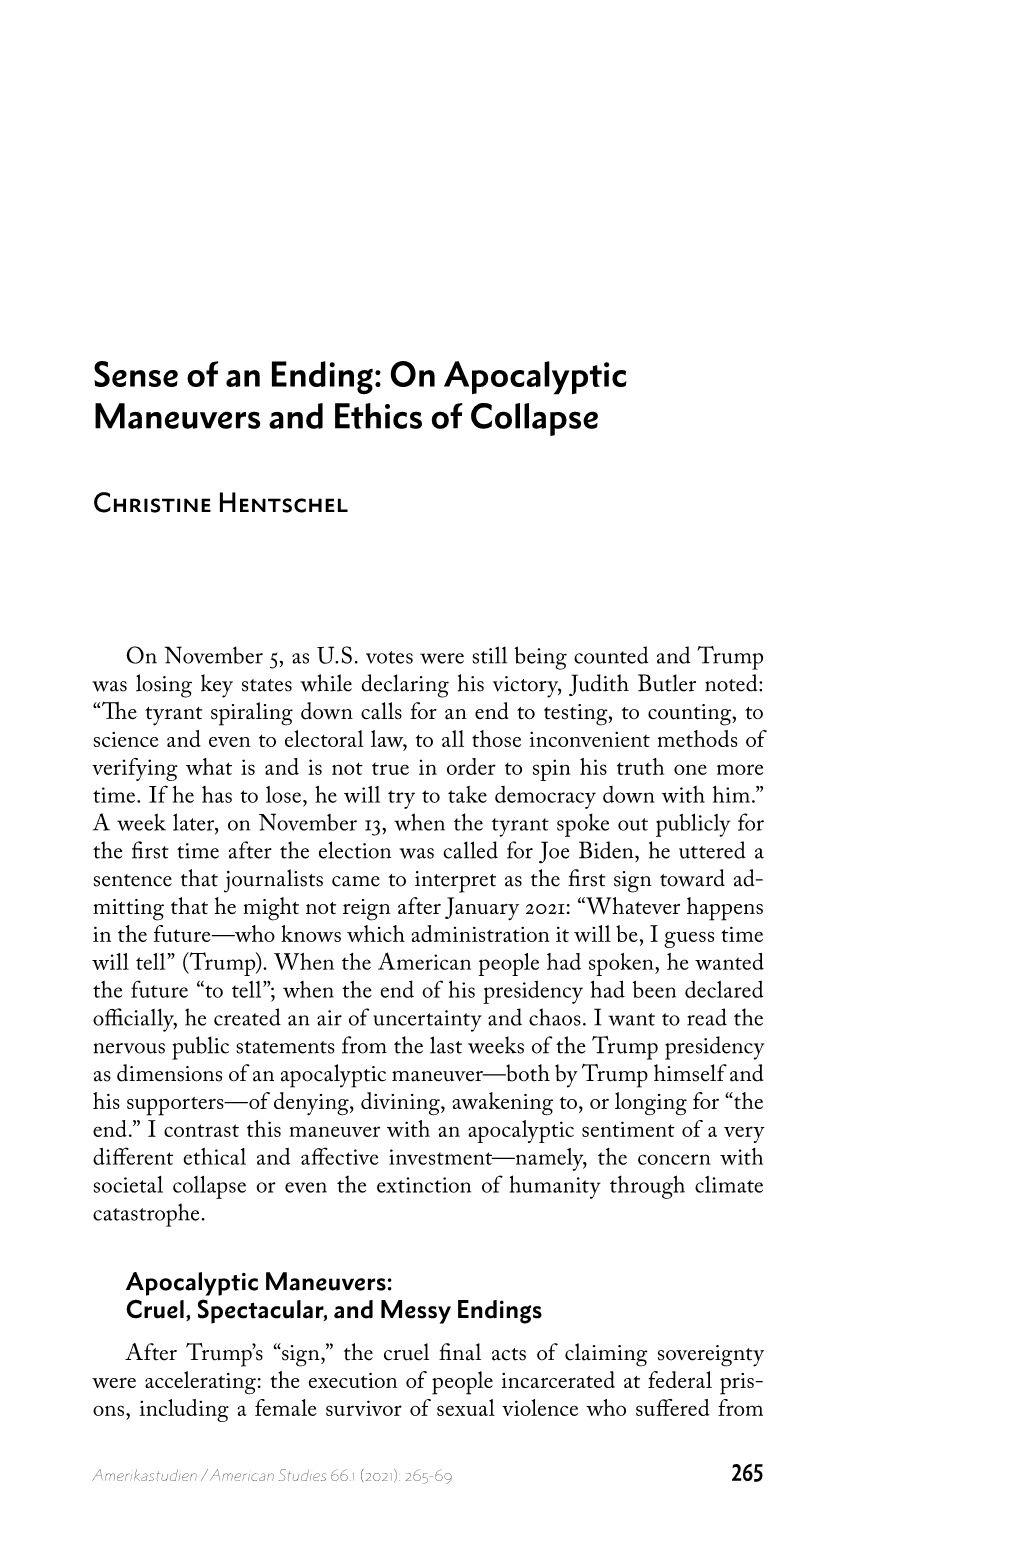 On Apocalyptic Maneuvers and Ethics of Collapse